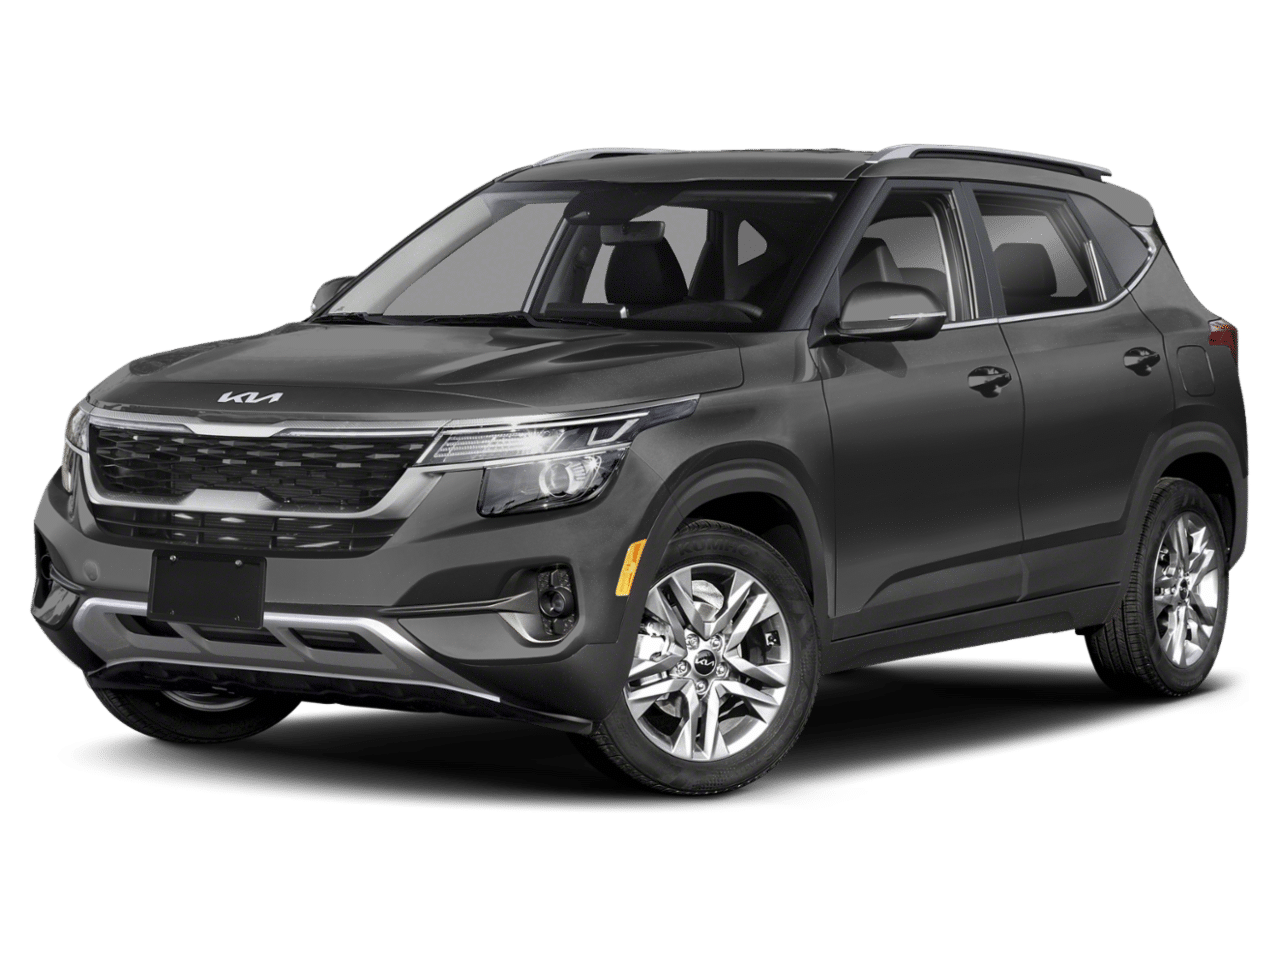 R & R Rent A Car offers premium car, SUV, and minivan rentals in Sterling Colorado